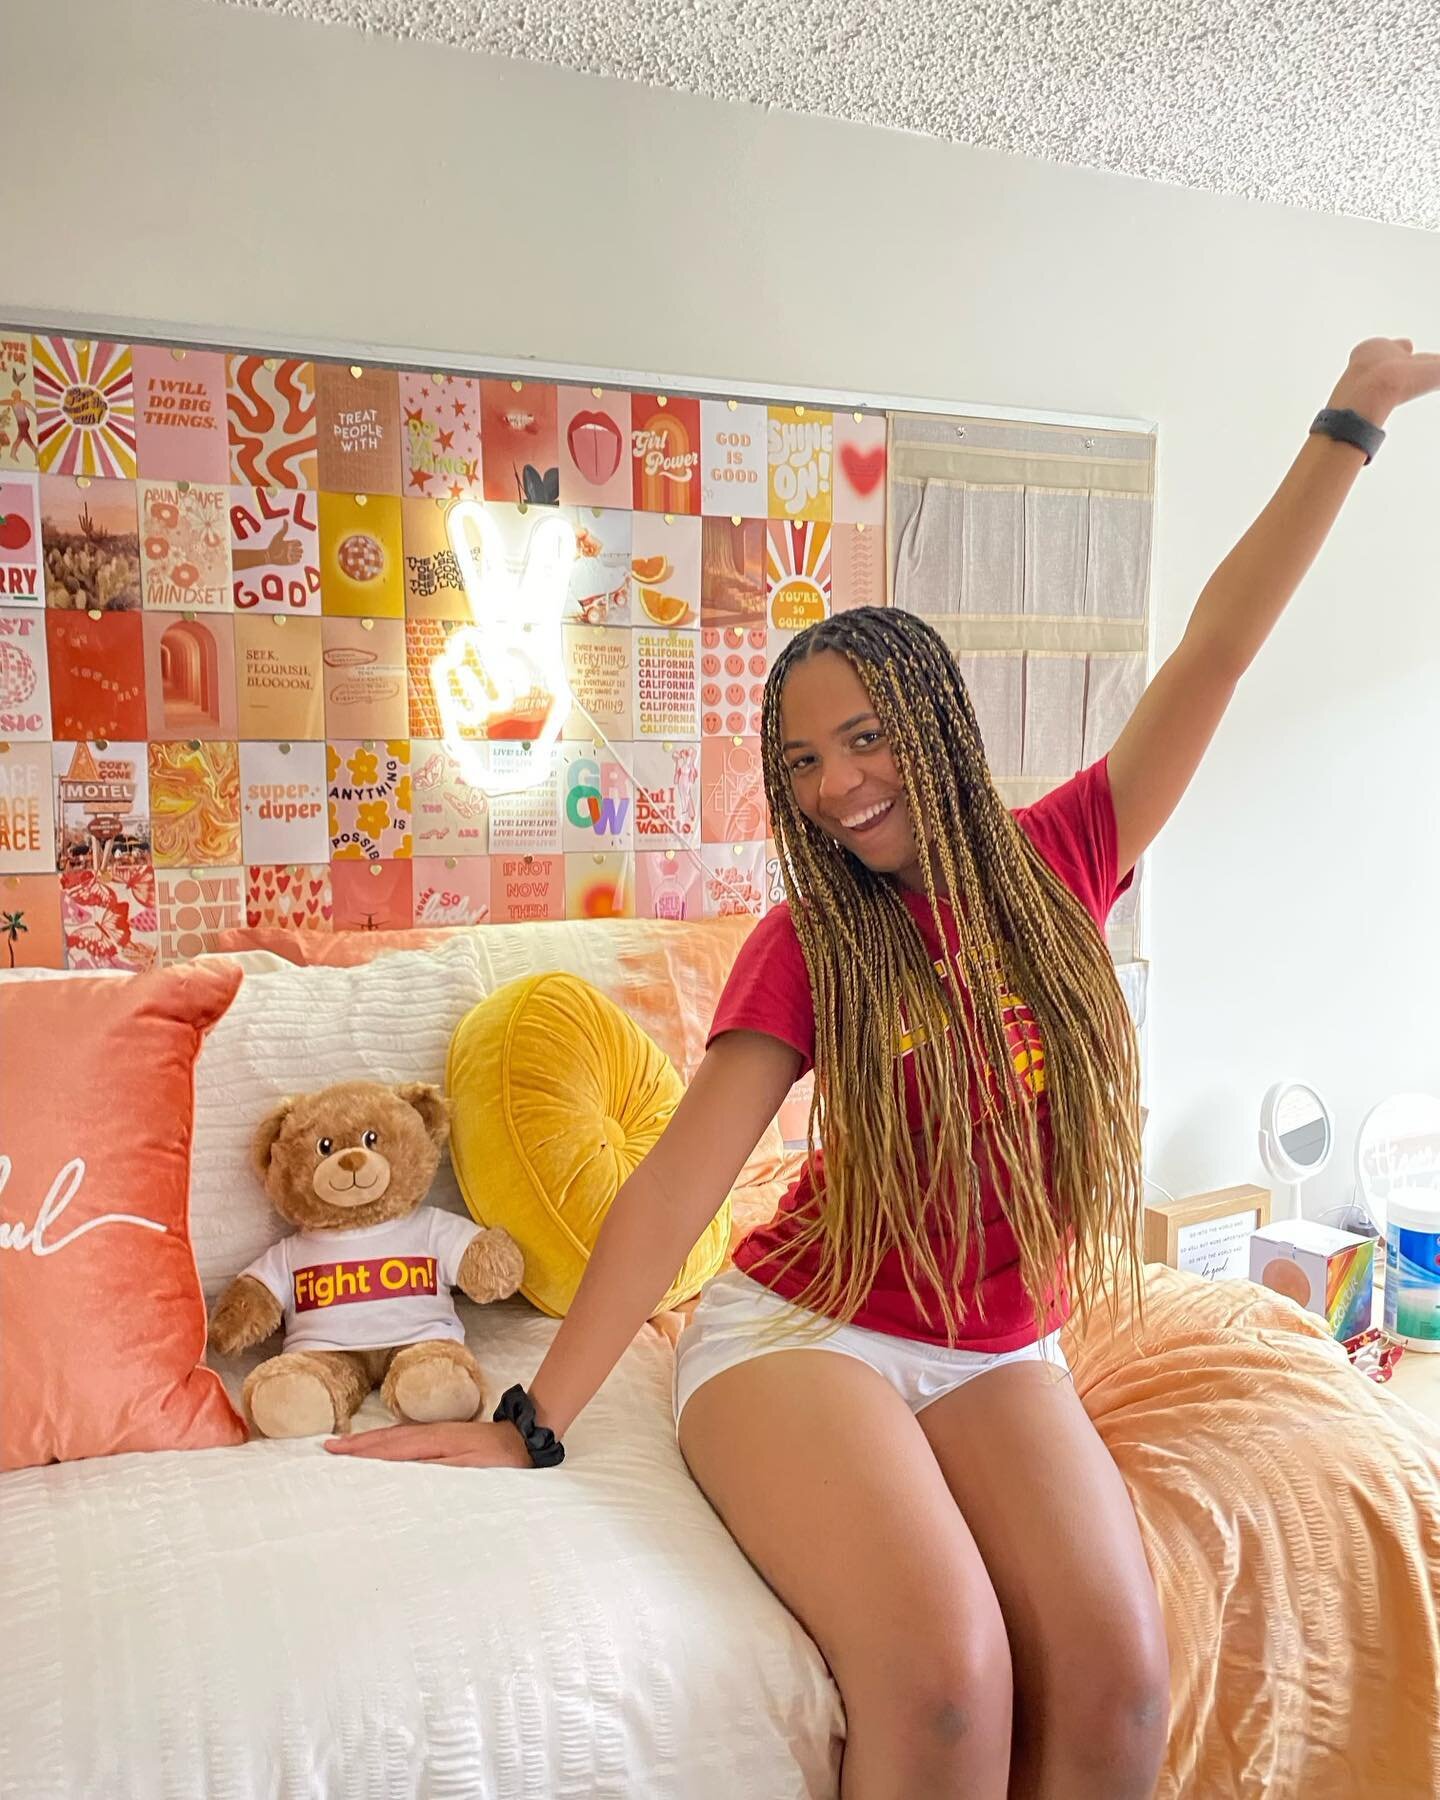 alexis myers add sexy college dorm photo